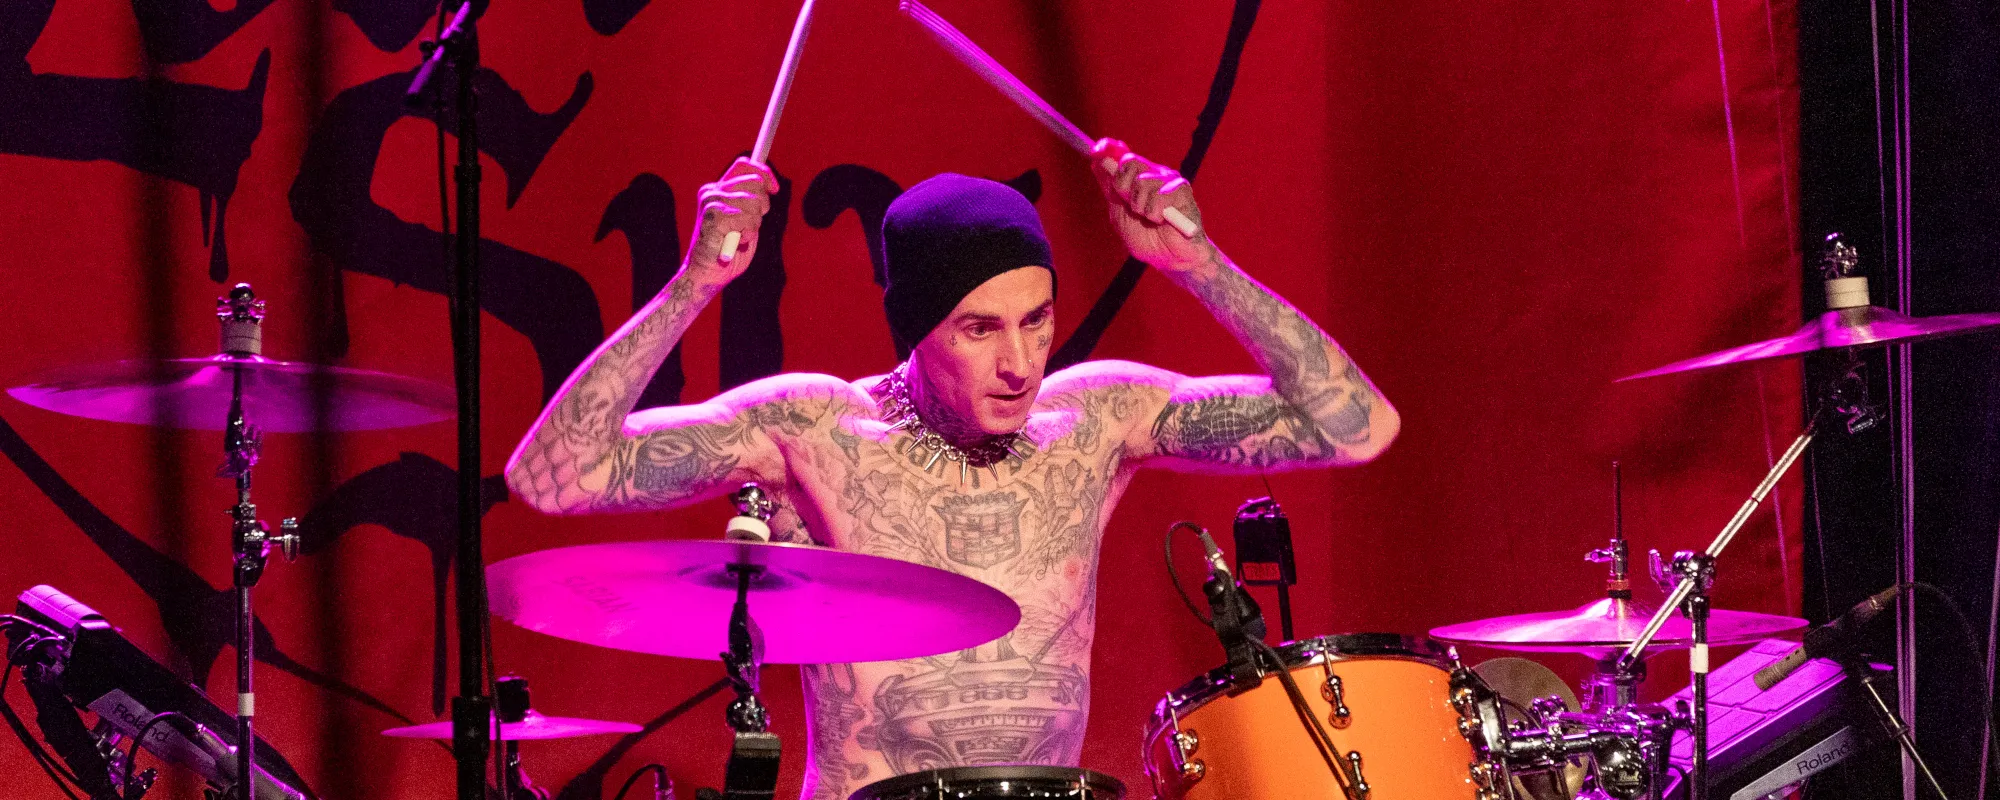 5 Songs You Didn’t Know Travis Barker Wrote for Machine Gun Kelly